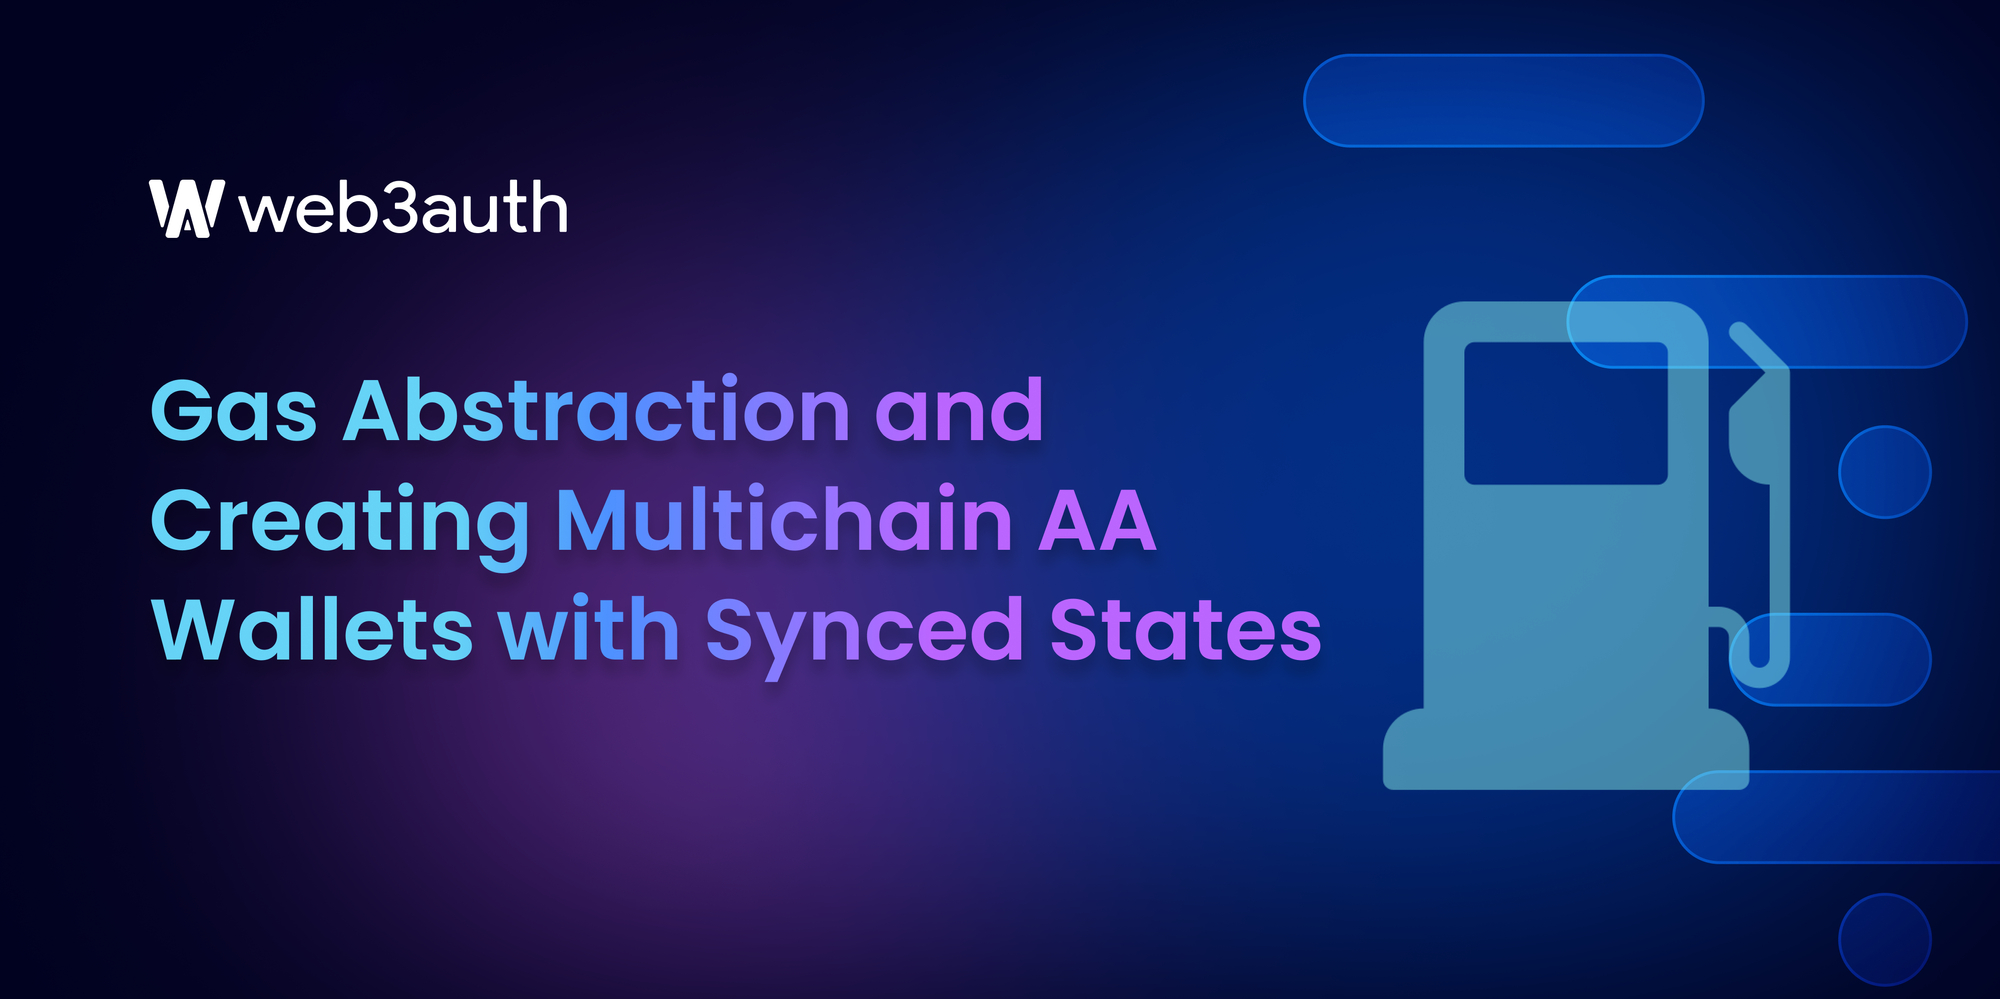 Gas Abstraction and Creating Multichain AA Wallets with Synced States